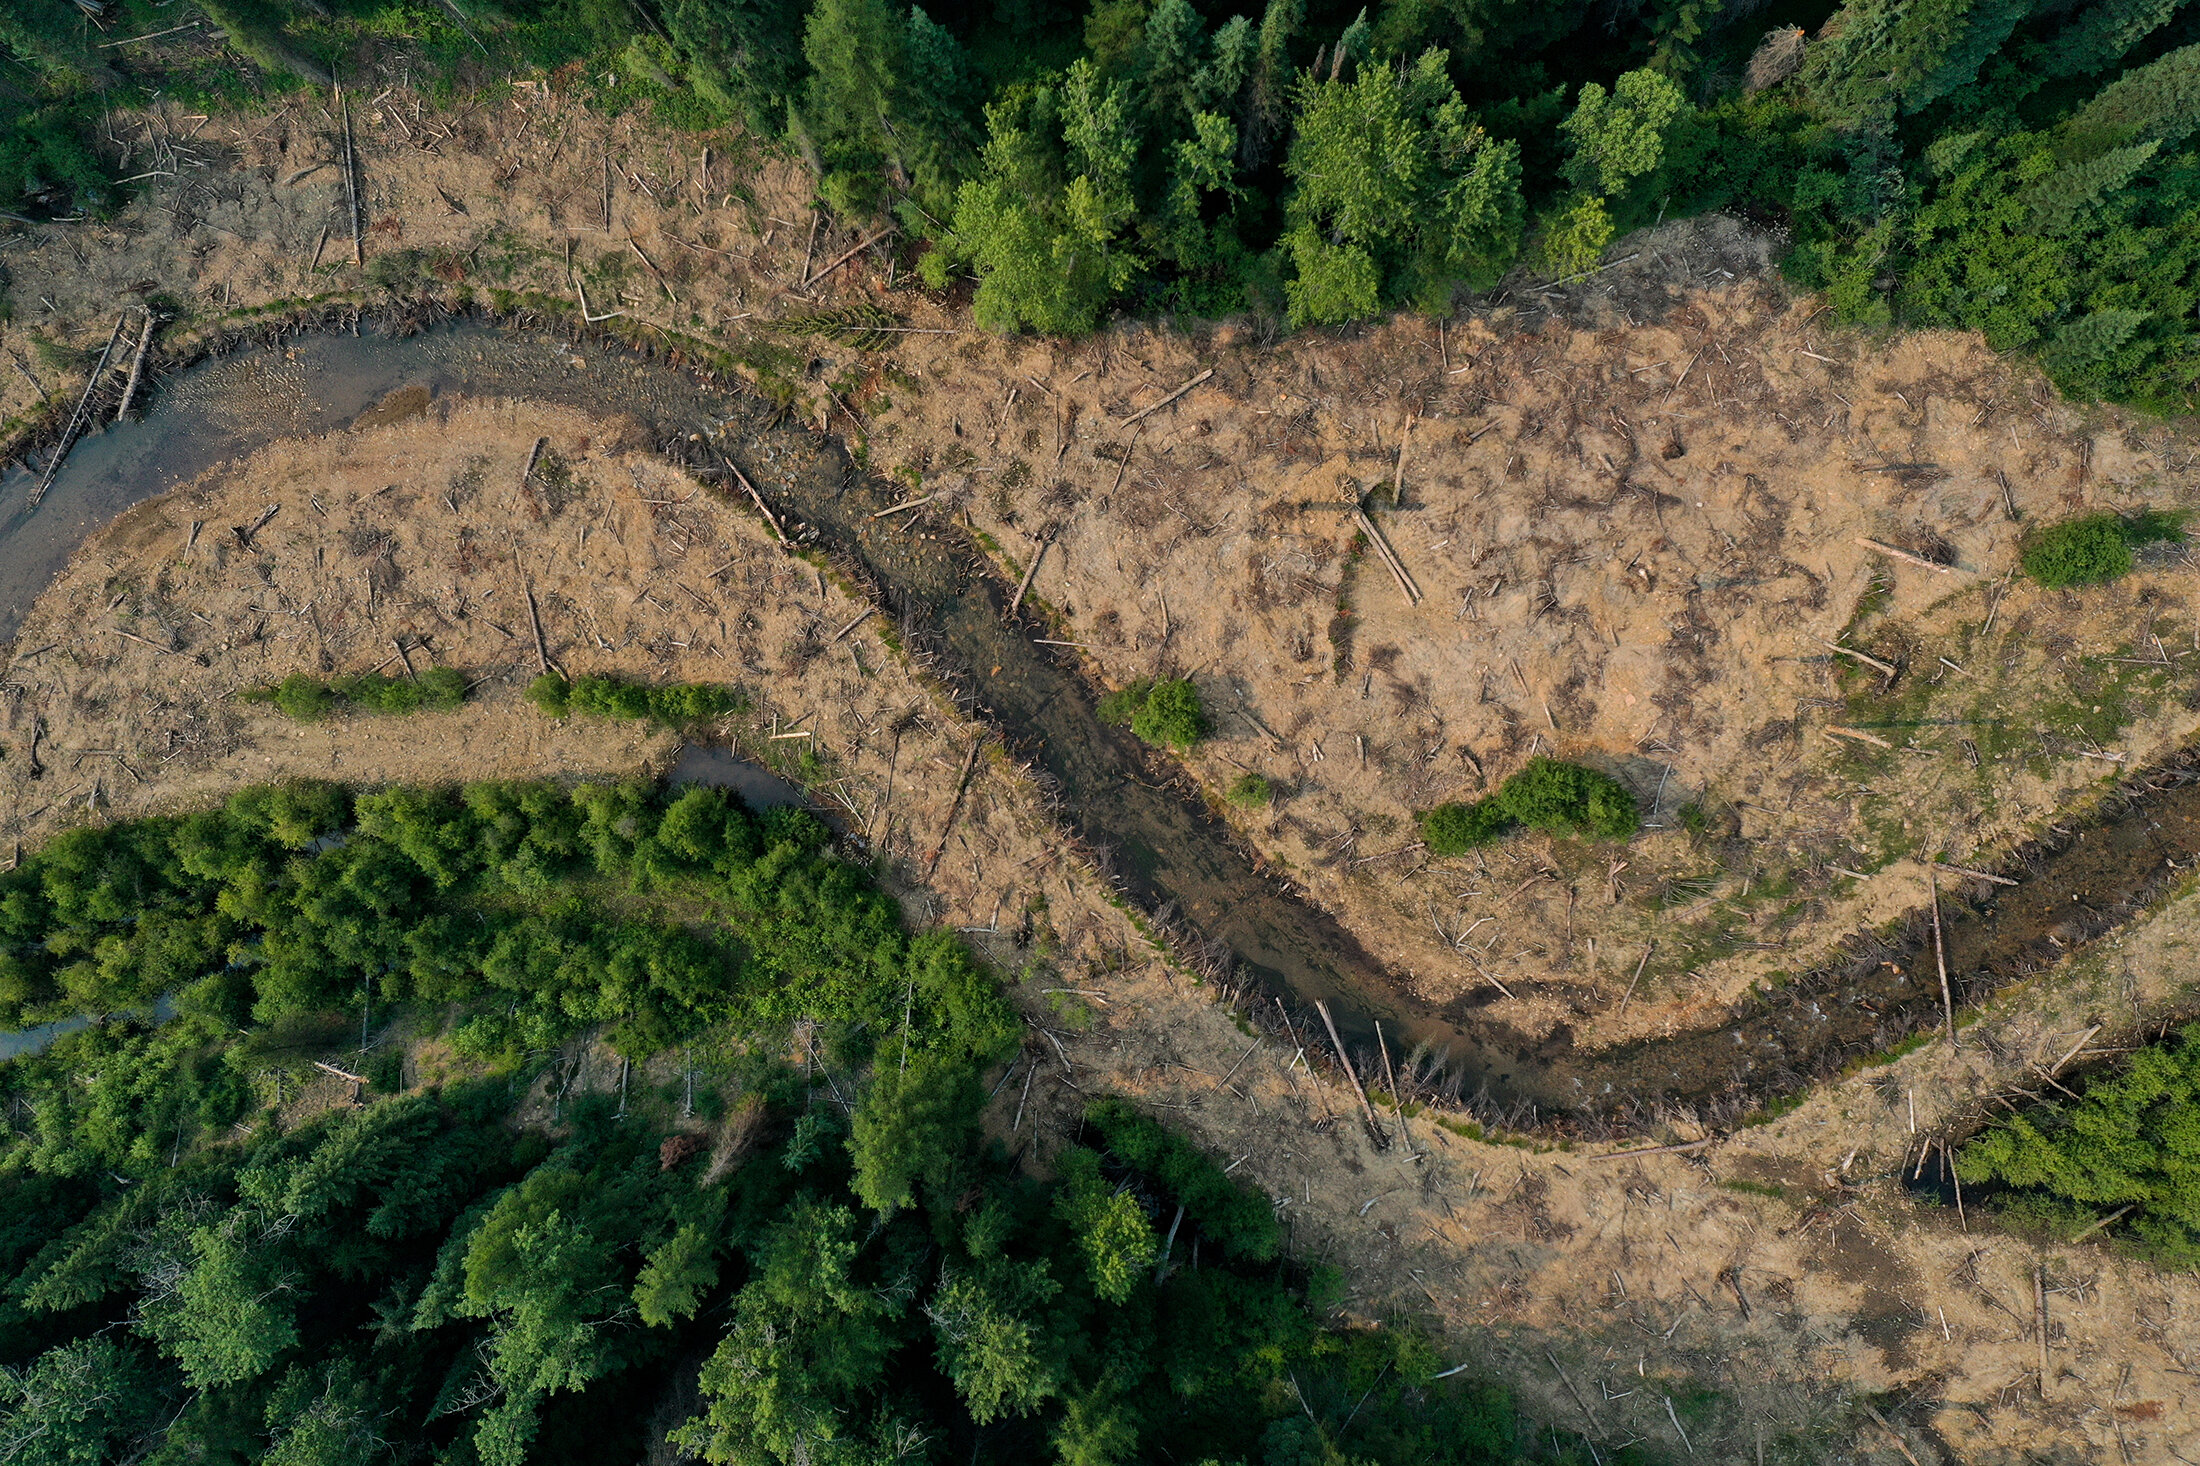  An overhead view shows the restored habitat around Ninemile Creek, July 15, 2021. Roughly 20 volunteers and veterans from Trout Unlimited, Warriors and Quiet Waters and Montana Fish Wildlife and Parks are working on a restoration project to repair p